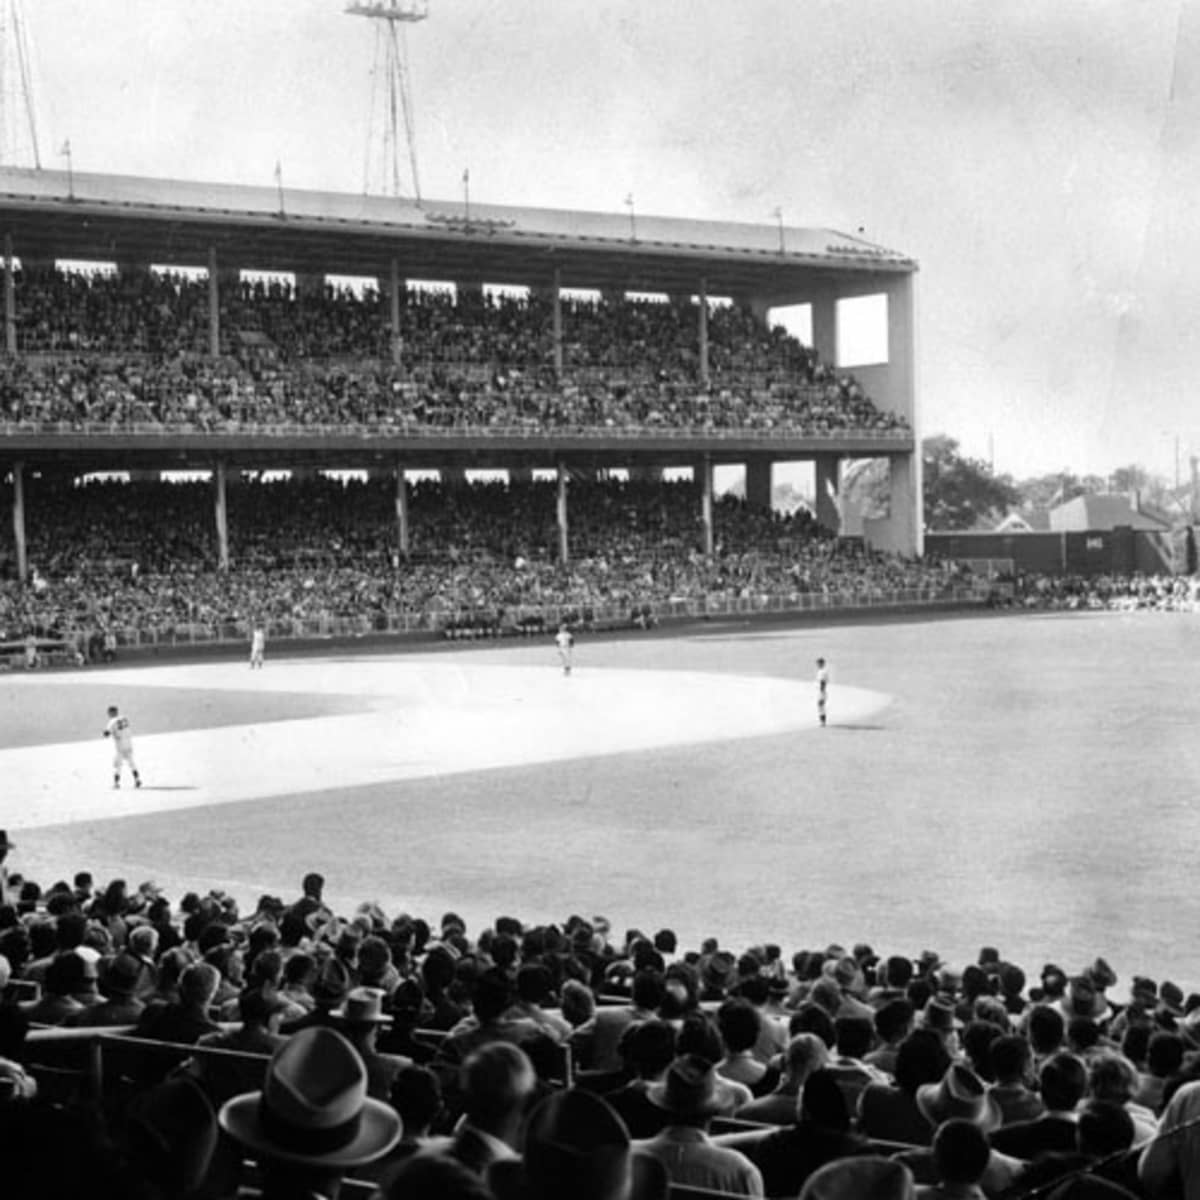 PHOTOS: Remember, Wrigley Field was NFL venue back in the day